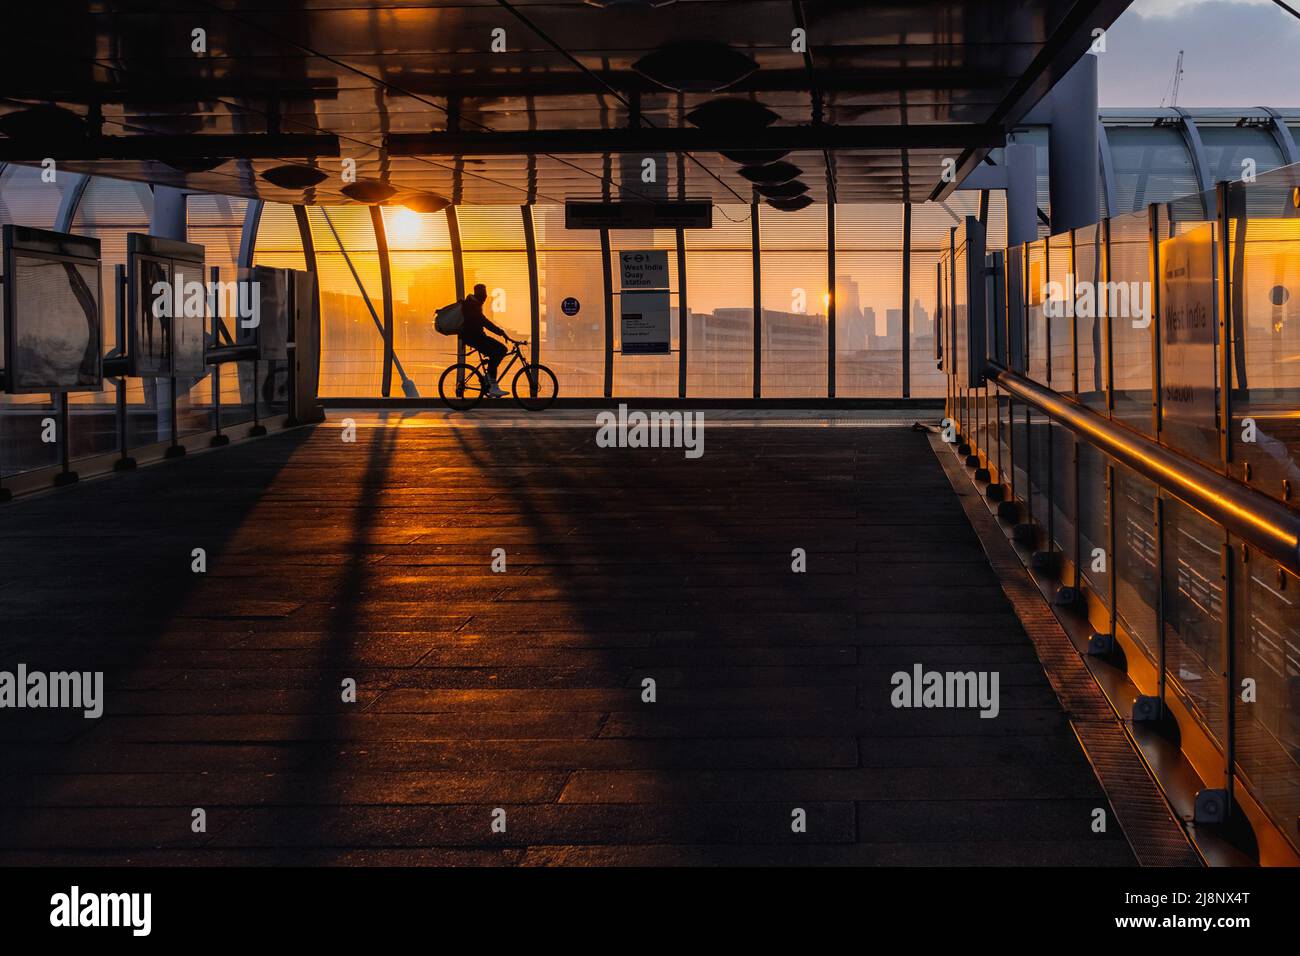 Sunset at Poplar Docklands Light Railway station in East London, a food delivery cyclists casts a silhouette. Stock Photo